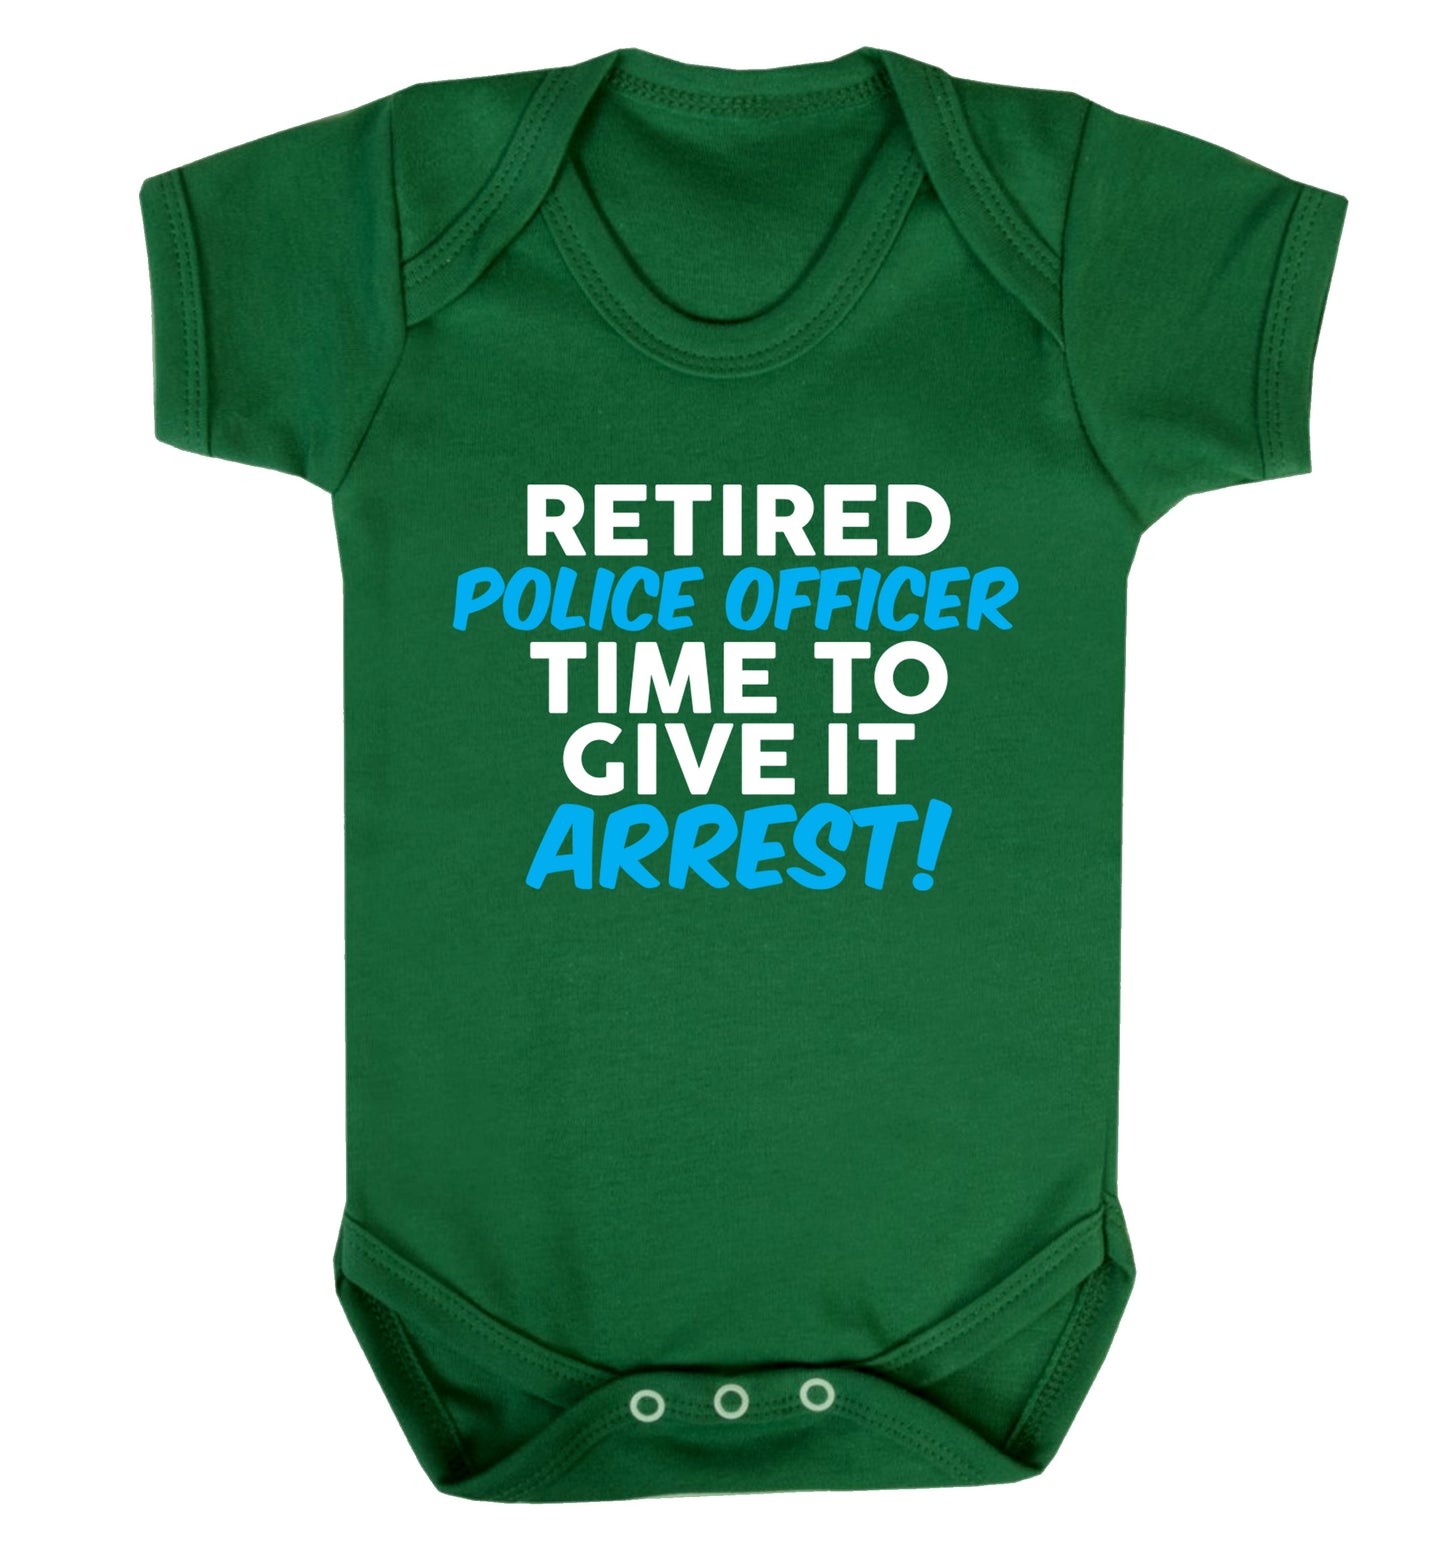 Retired police officer time to give it arrest Baby Vest green 18-24 months